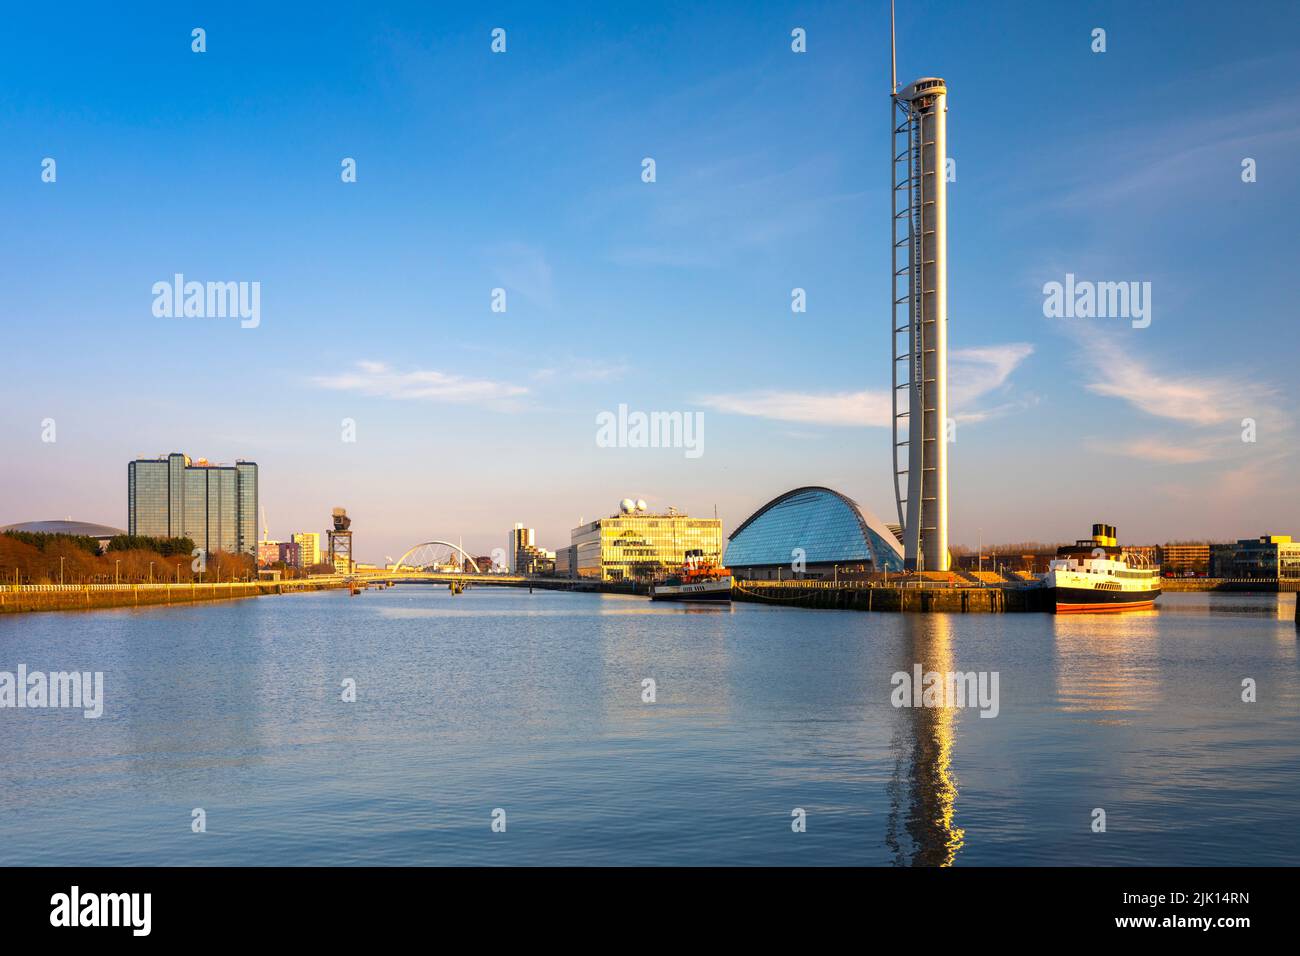 Glasgow Tower, Science Center, IMAX, The Waverley, TS Queen Mary, River Clyde, Glasgow, Écosse, Royaume-Uni, Europe Banque D'Images